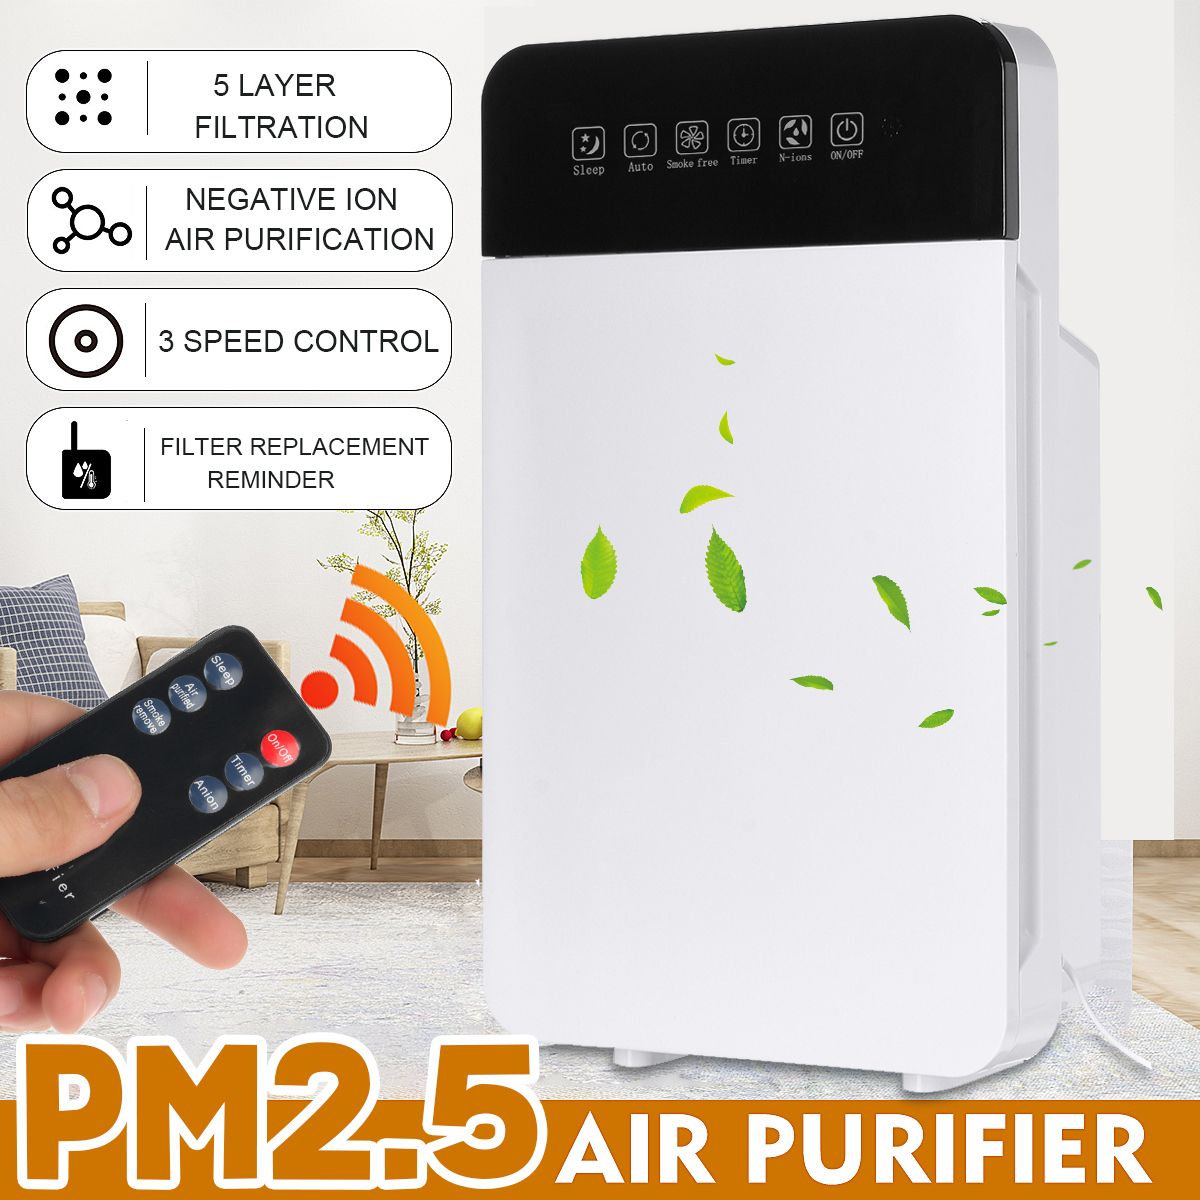 Air-Purifier-Negative-Ions-Air-Cleaner-Remove-Formaldehyde-PM25-W-HEPA-Filter-1628421-2